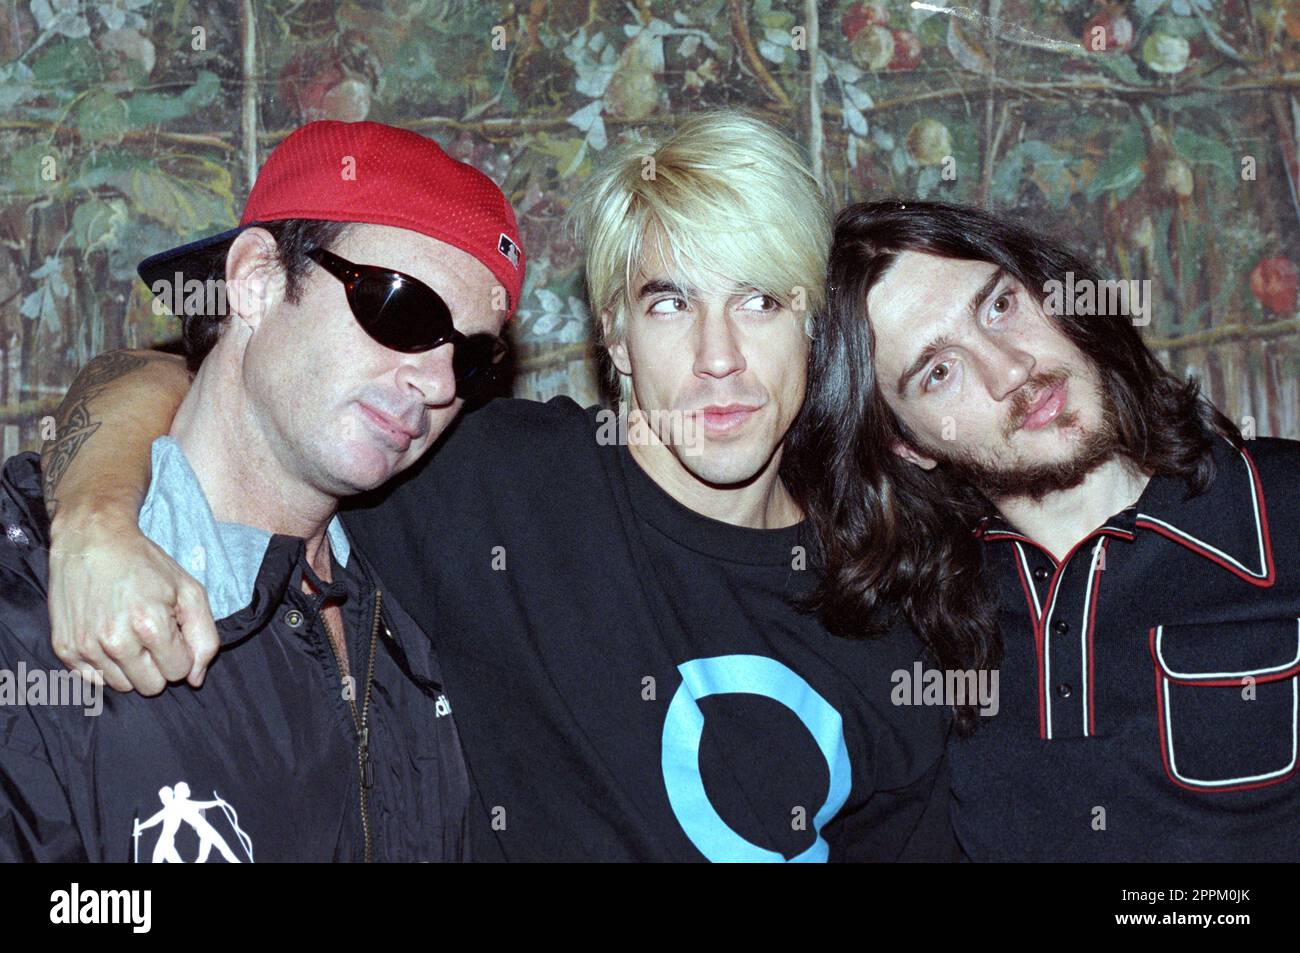 Milan Italy  25/07/1999: Chad Smith,Anthony Kiedis and John Frusciante of the band Red Hot Chili Peppers during the photo session before the press conference Stock Photo